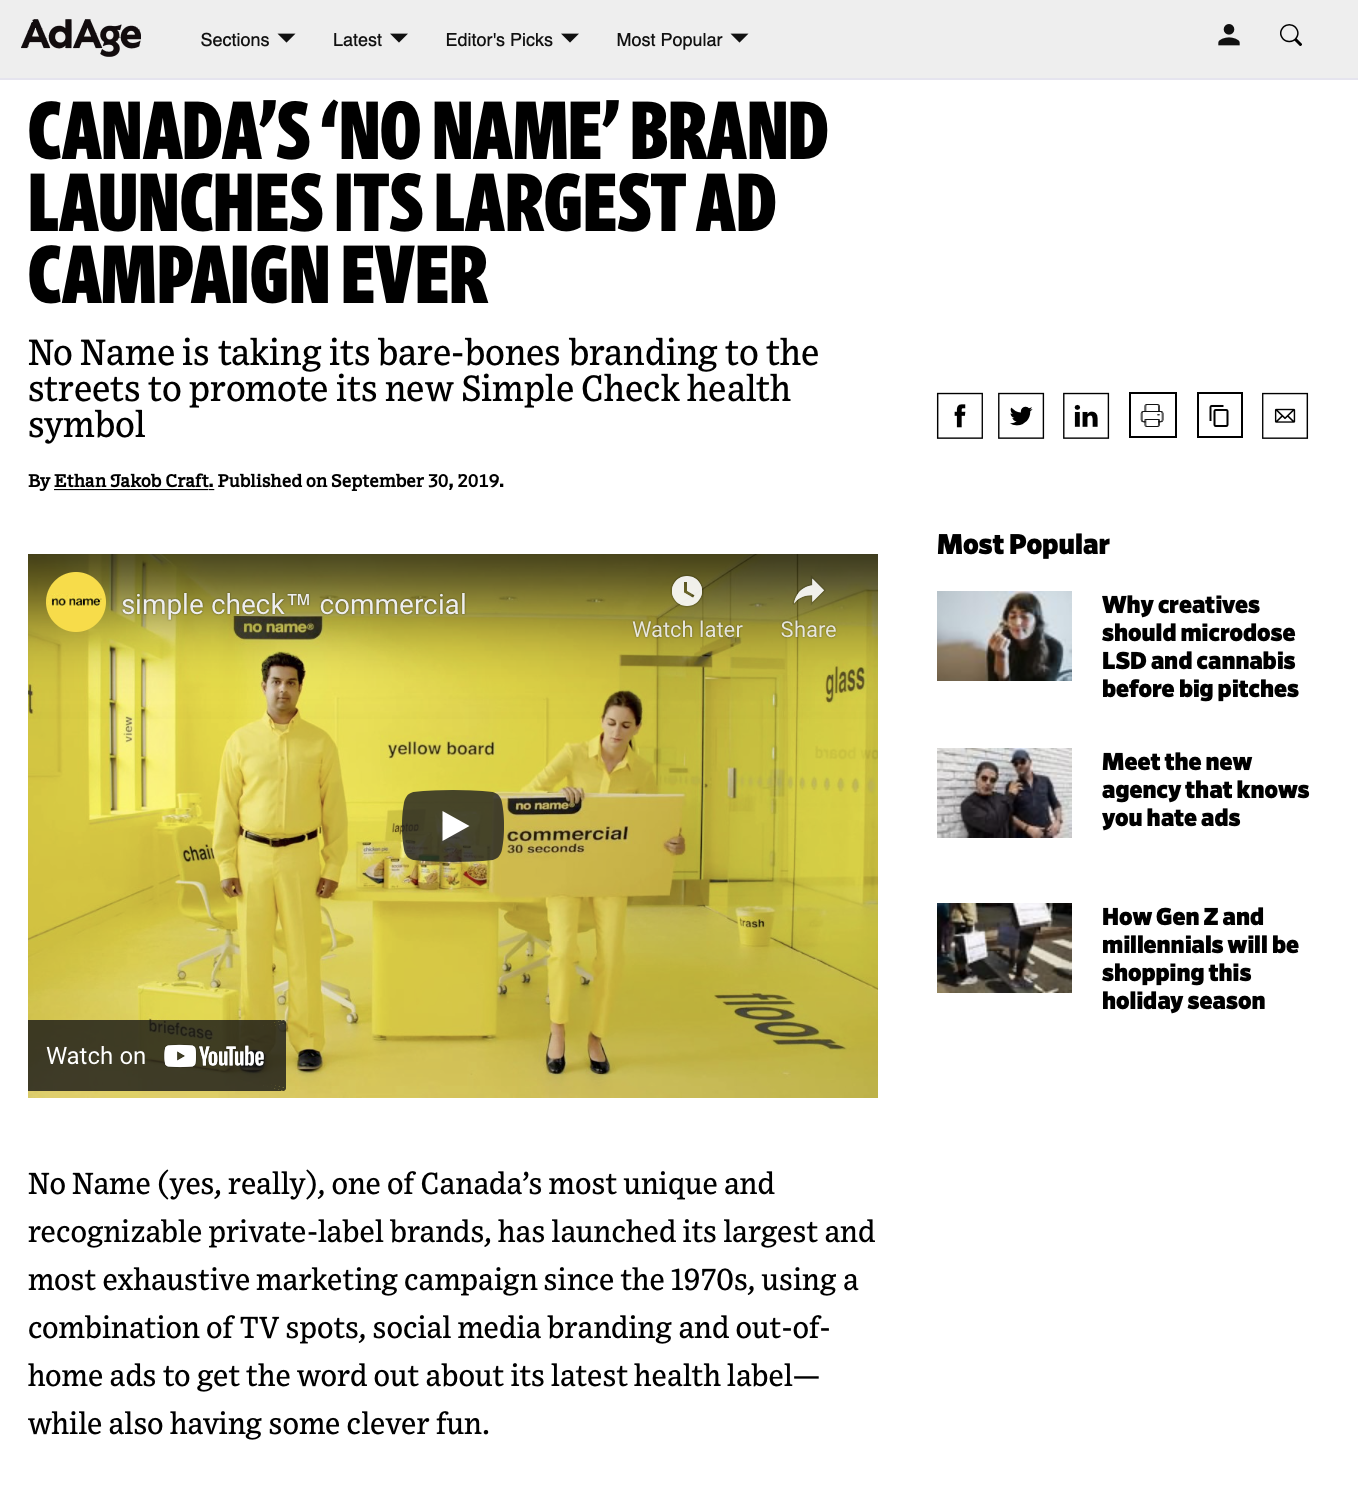 Canada's 'No Name' brand launches its largest ad campaign ever